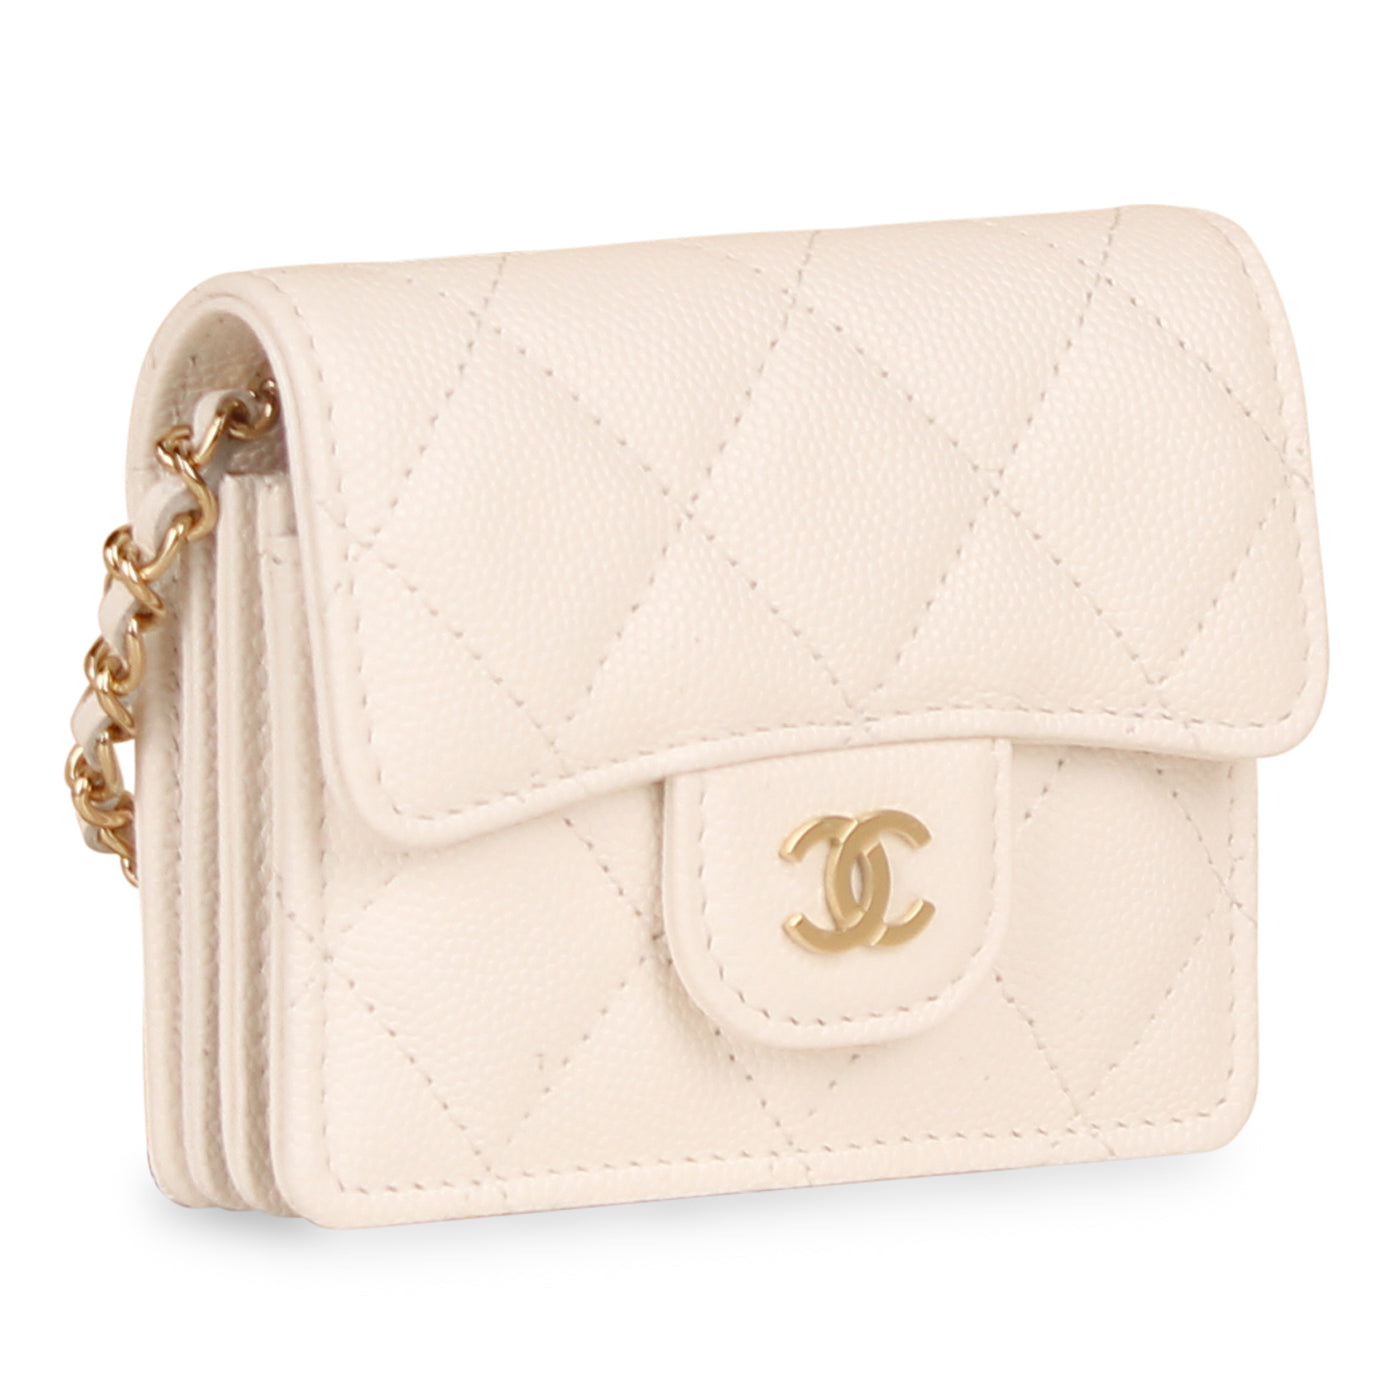 Chanel - Classic Flap Cardholder on Chain - White Caviar - GHW - Brand New